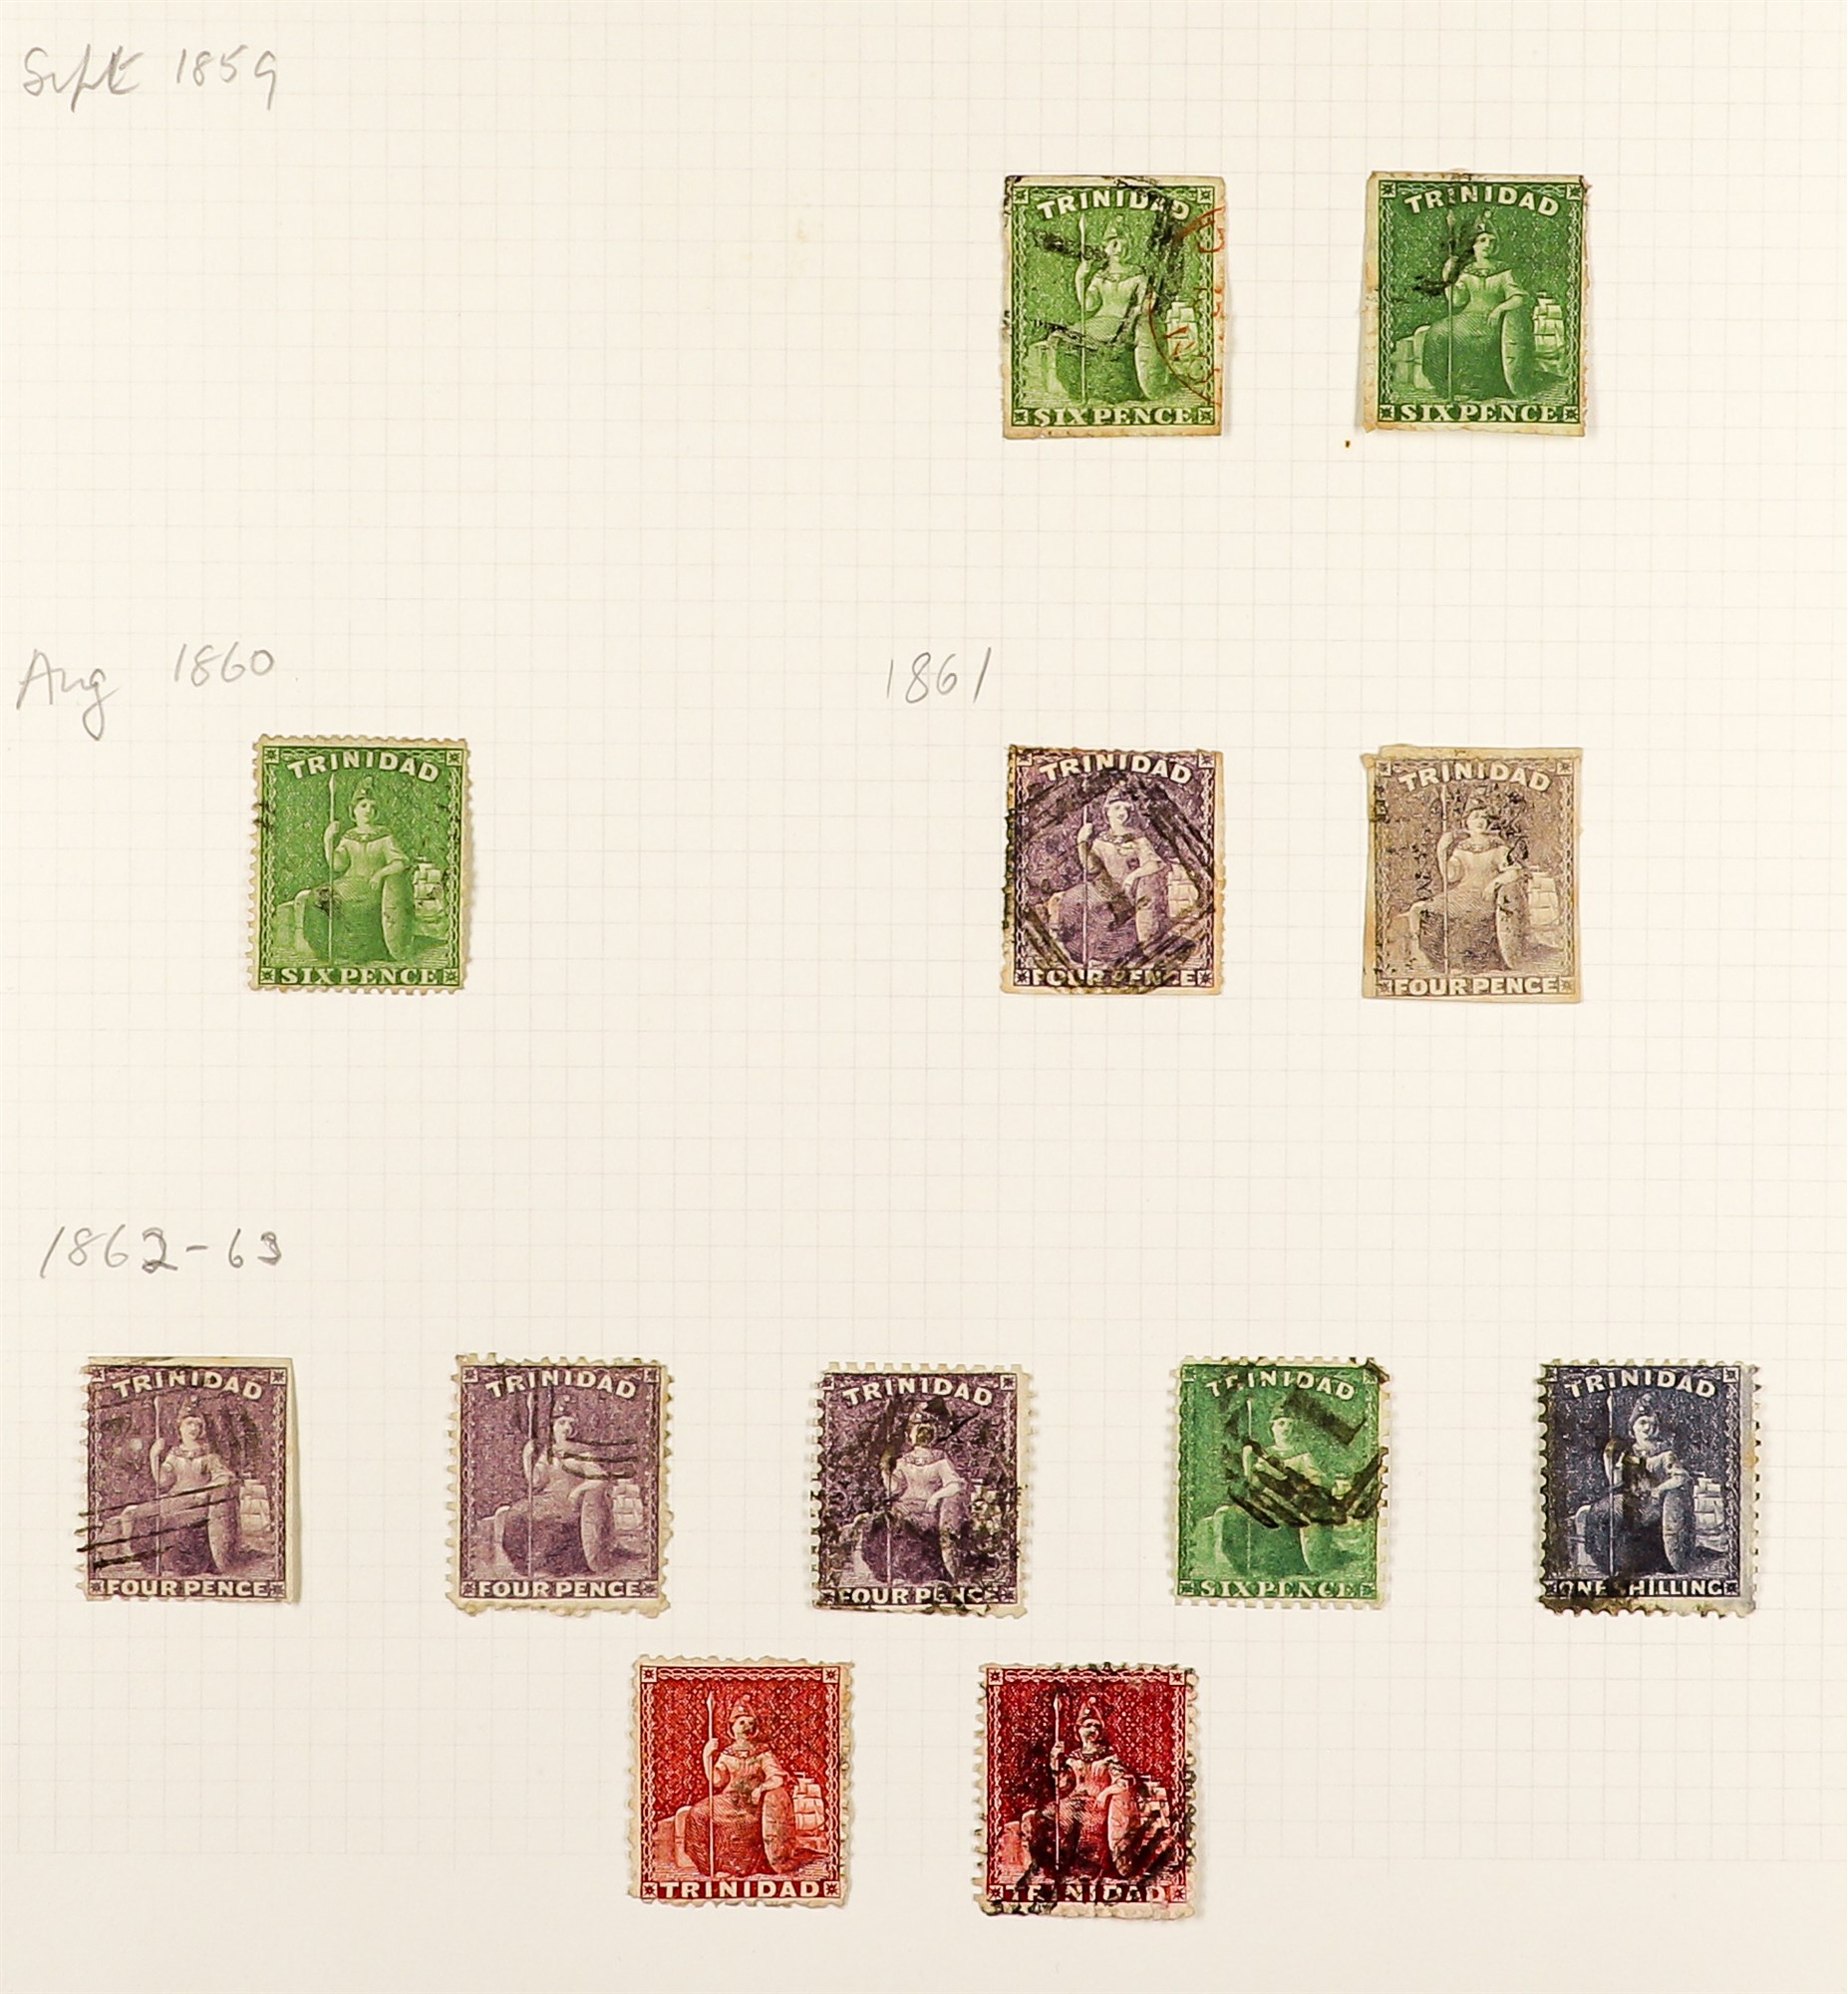 TRINIDAD 1851 - 1882 BRITANNIA CLASSICS collection of over 60 used stamps on album pages, the - Image 4 of 5